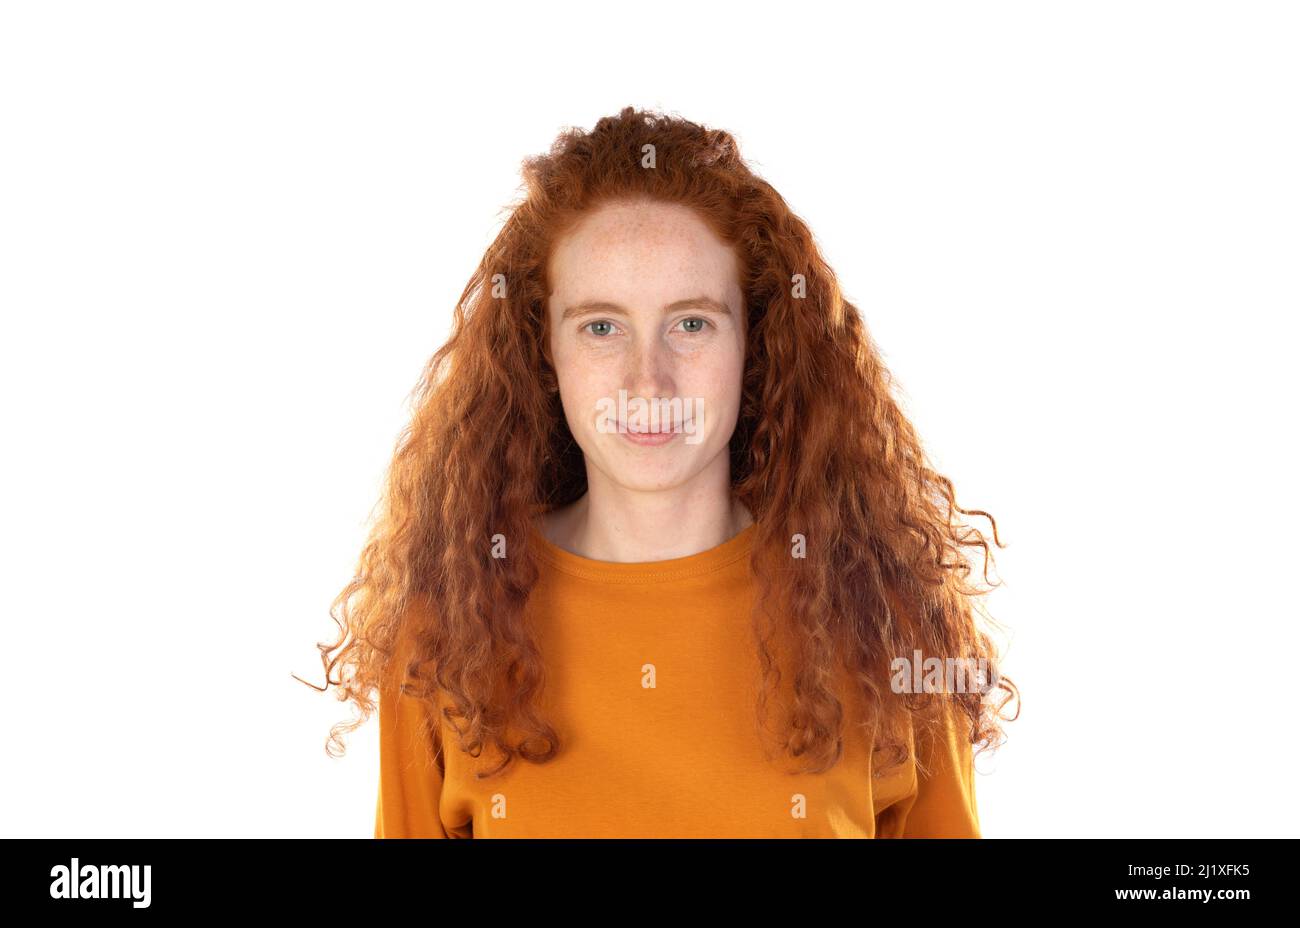 Redhaired younger woman with orange t-shirt isolated on a white background Stock Photo